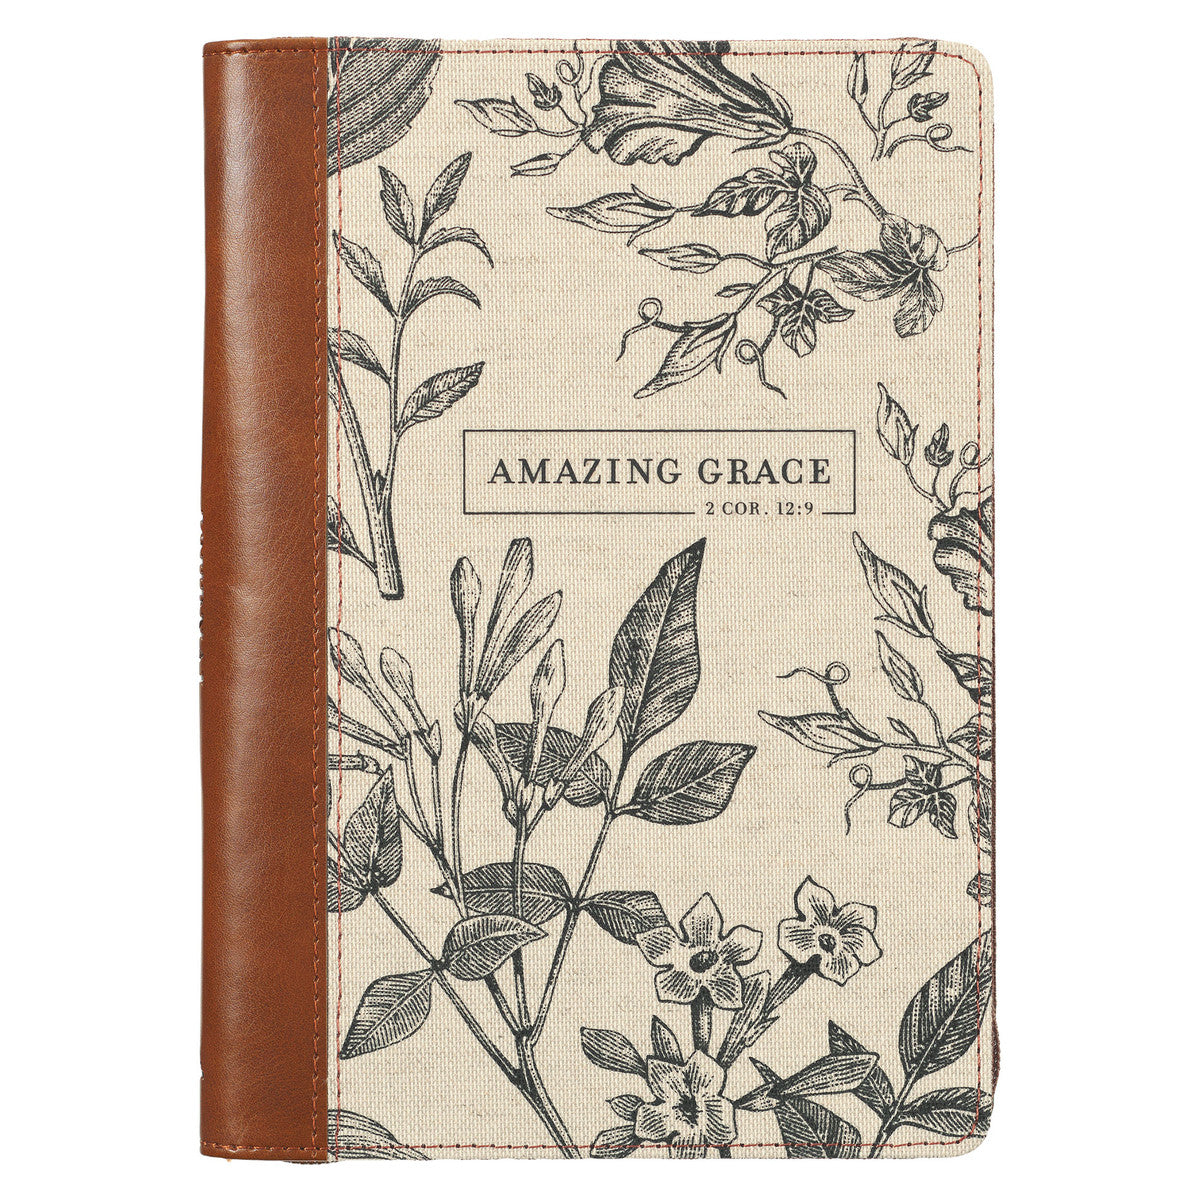 Amazing Grace Natural Canvas and Faux Leather Journal with Zipper Closure - 2 Corinthians 12:9